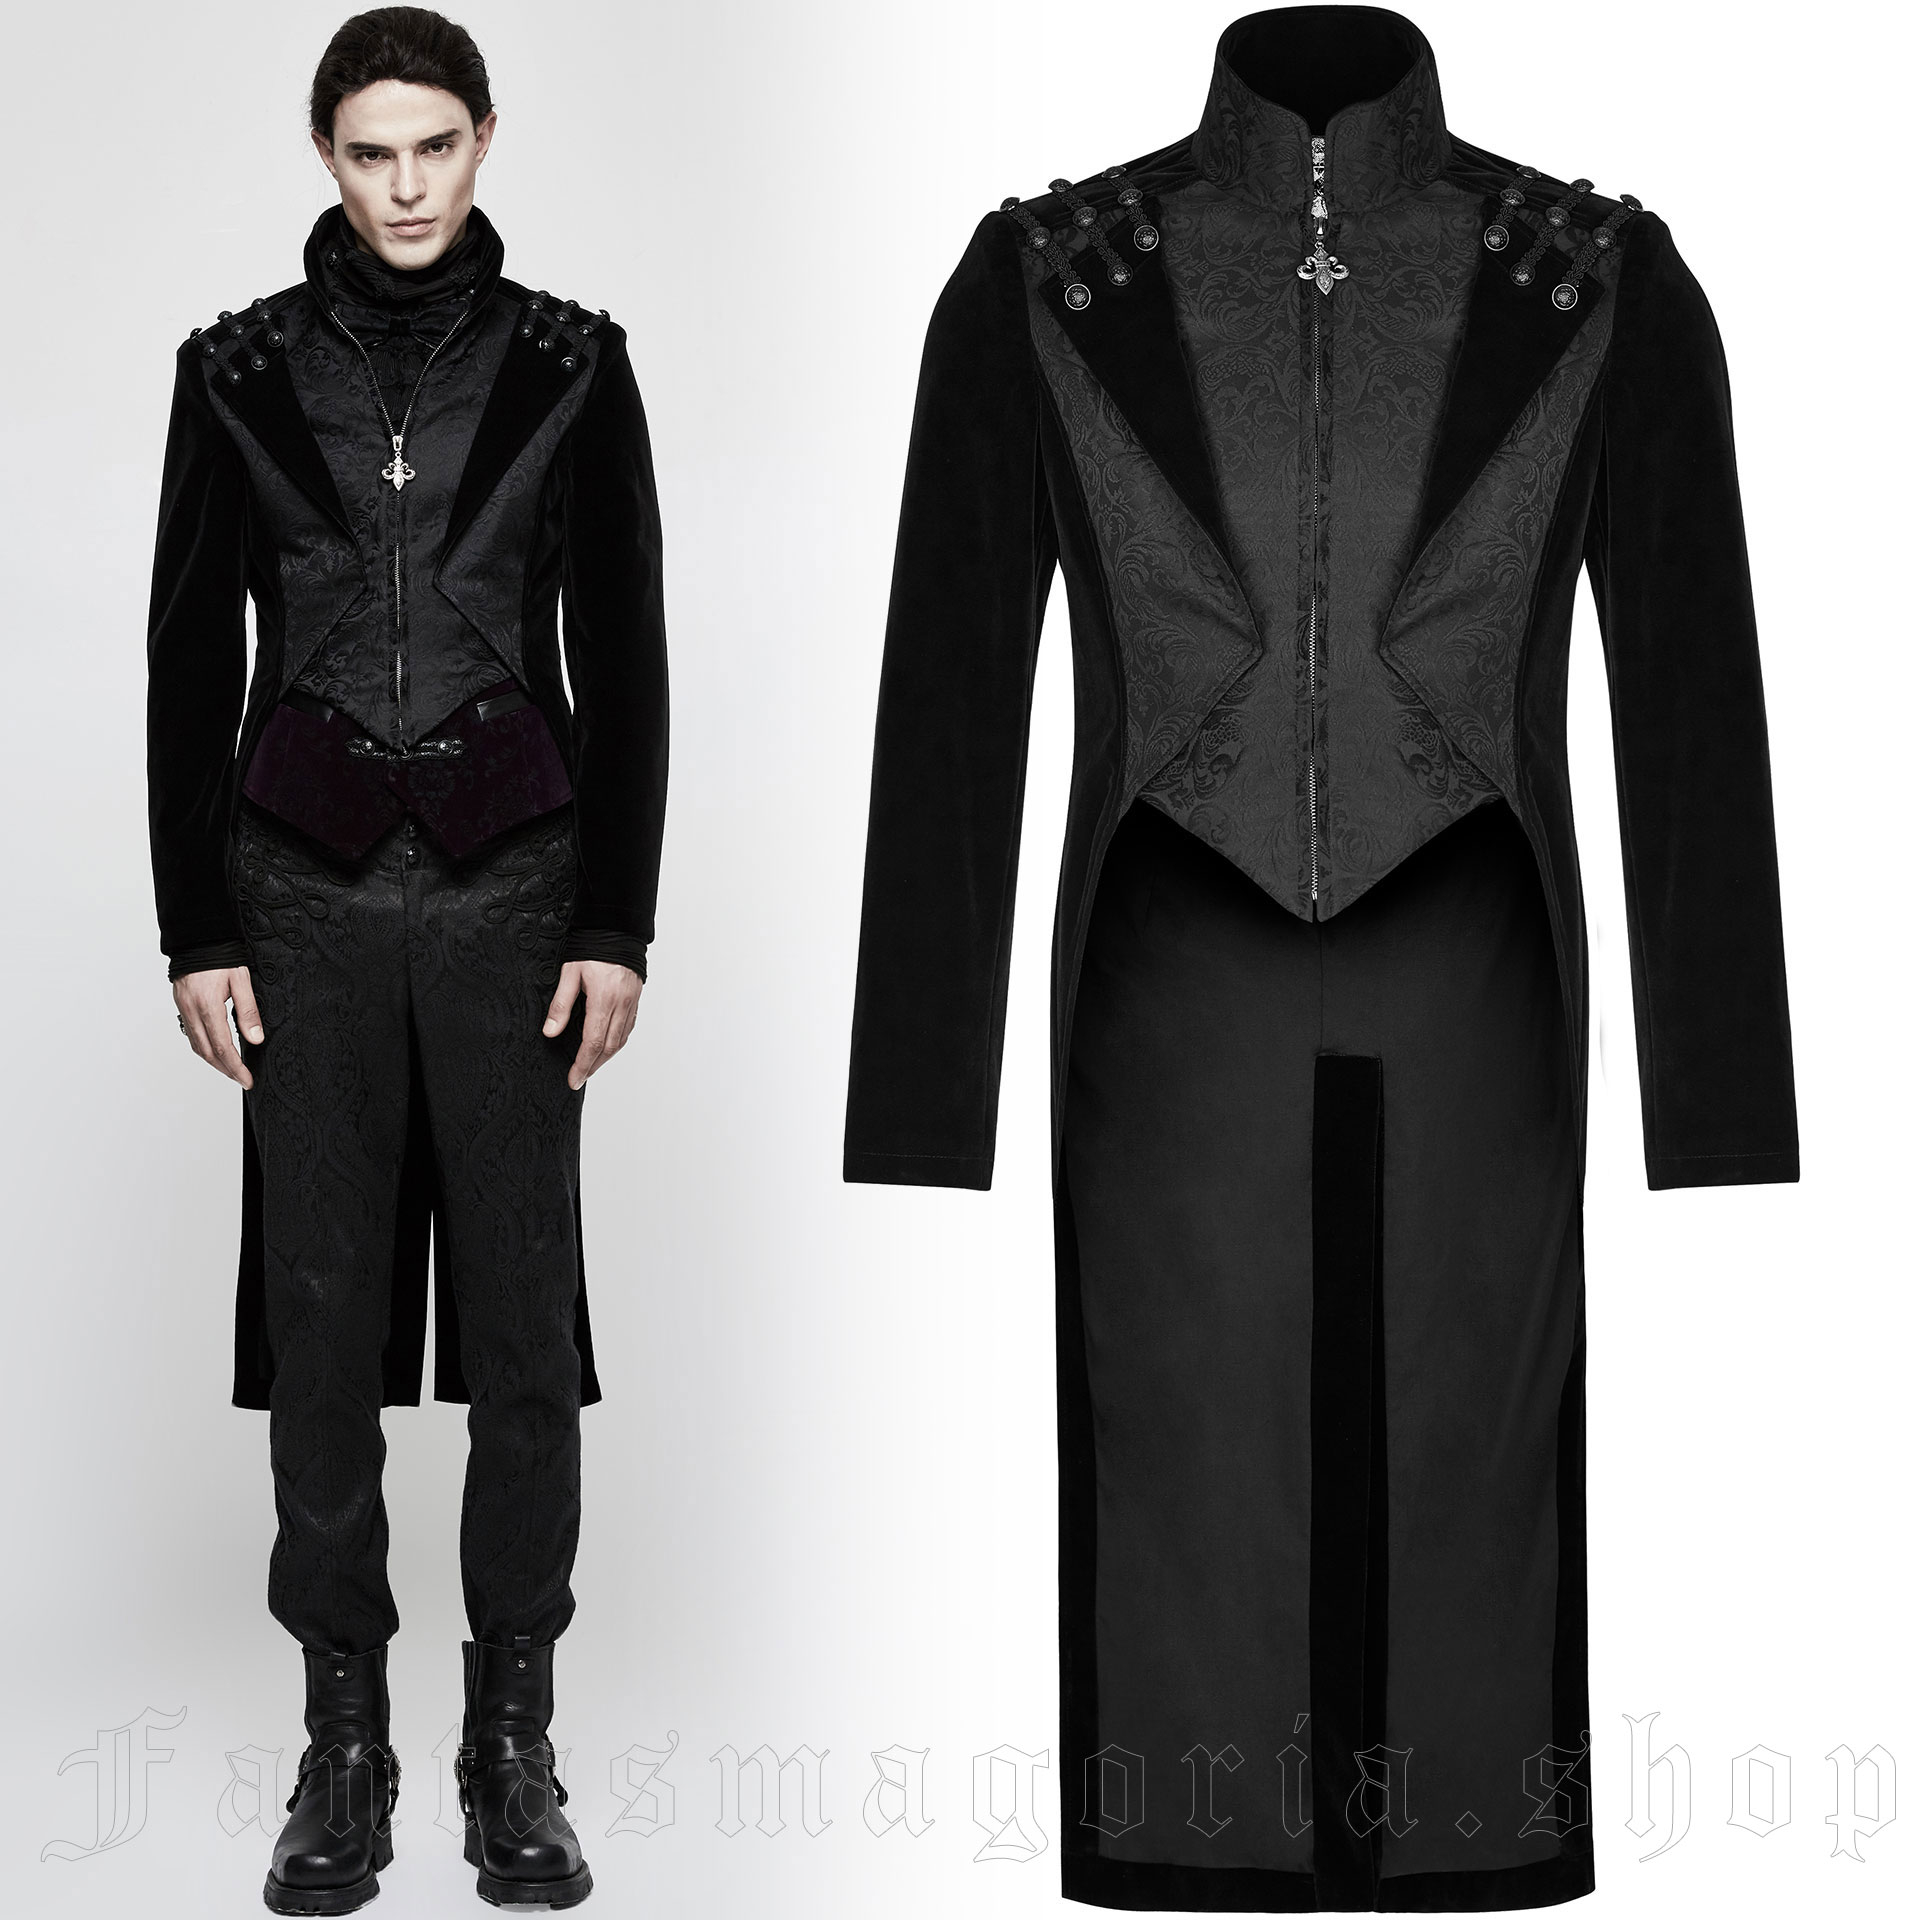 The Dynasty Of Darkness Tailcoat Punk Rave Y-814 1